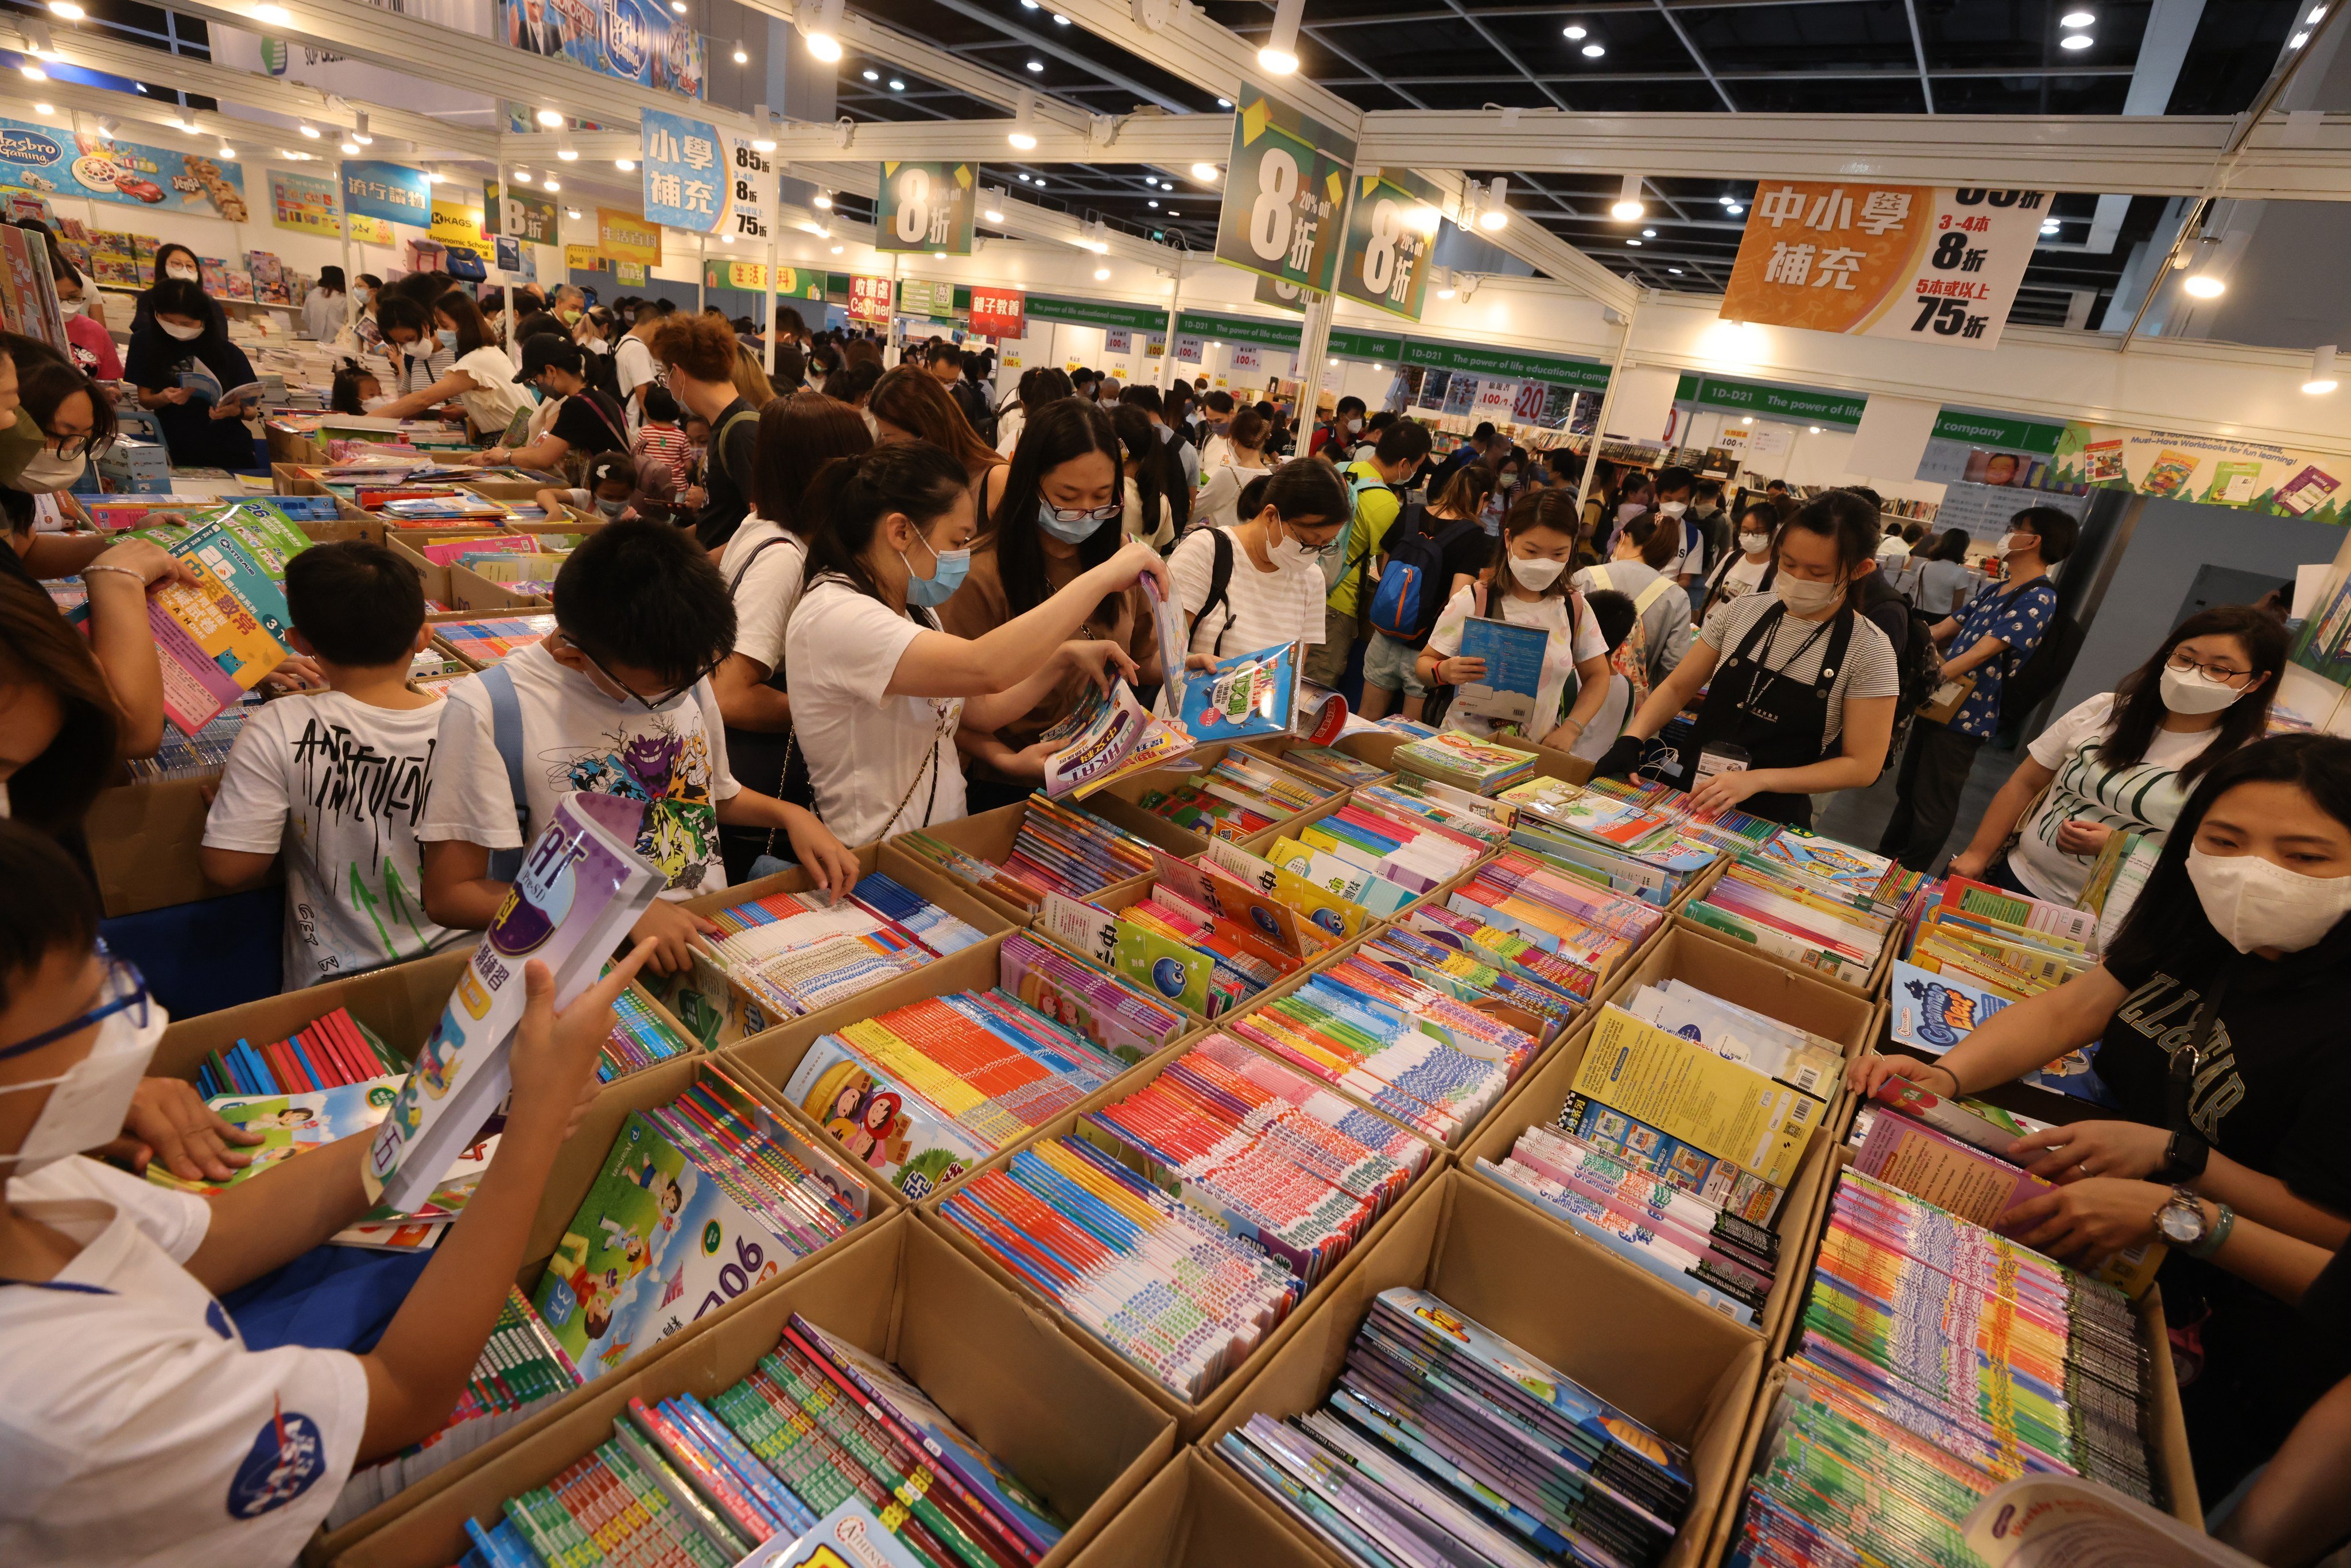 Visitors snapped up books, snacks, sports and leisure products from more than 700 exhibitors at the Hong Kong Book Fair. Photo: Nora Tam